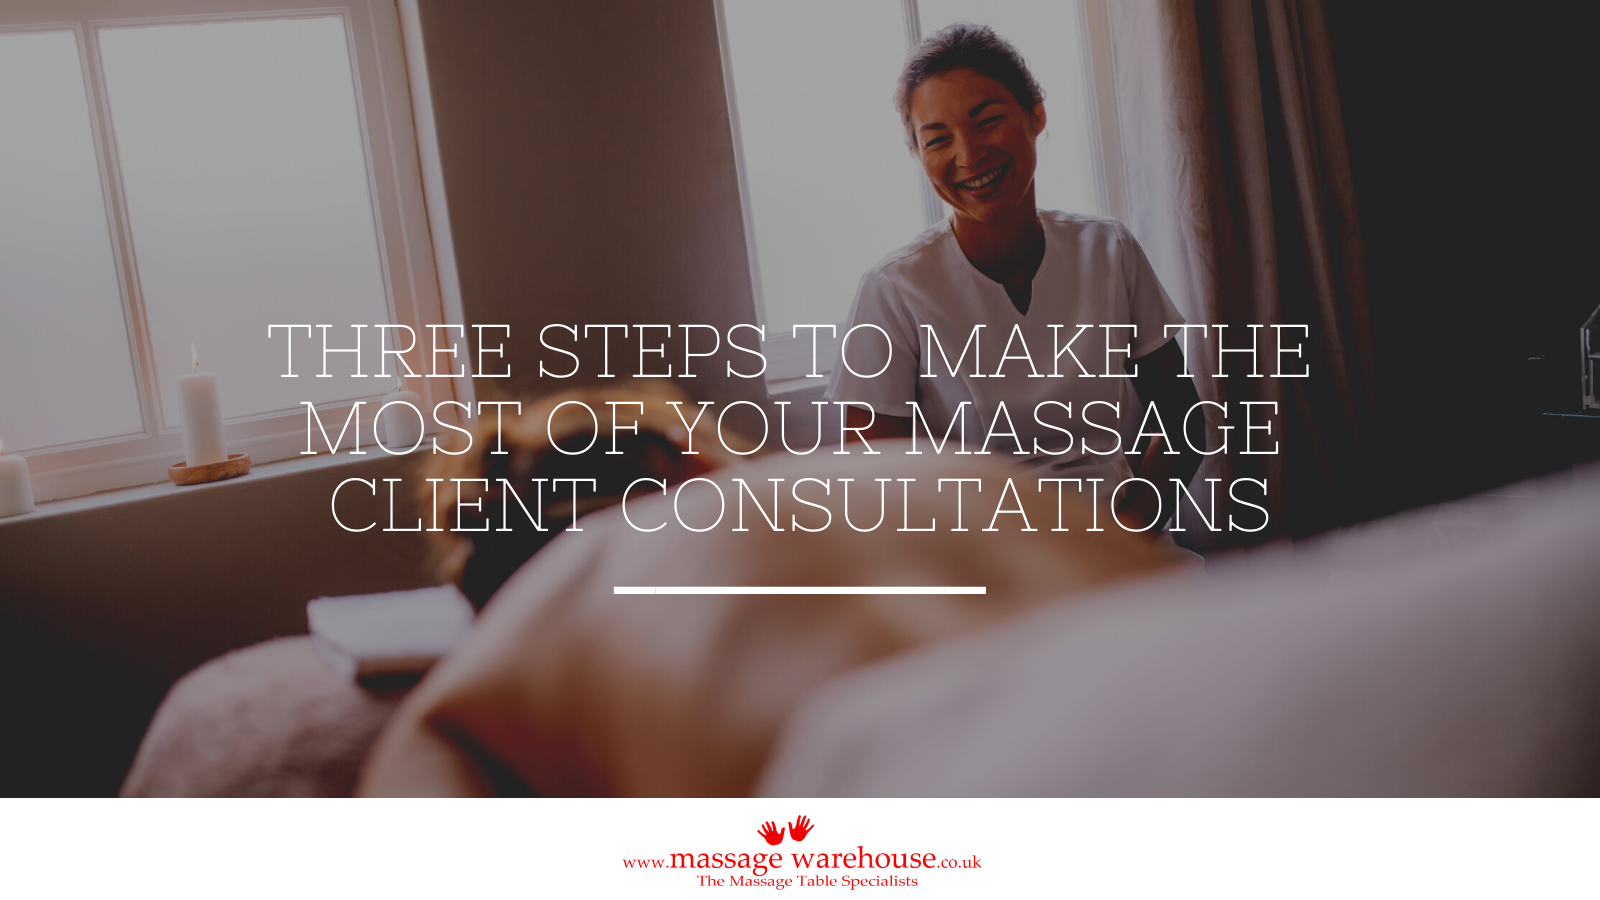 3 Steps To Make The Most Of Your Massage Client Consultations